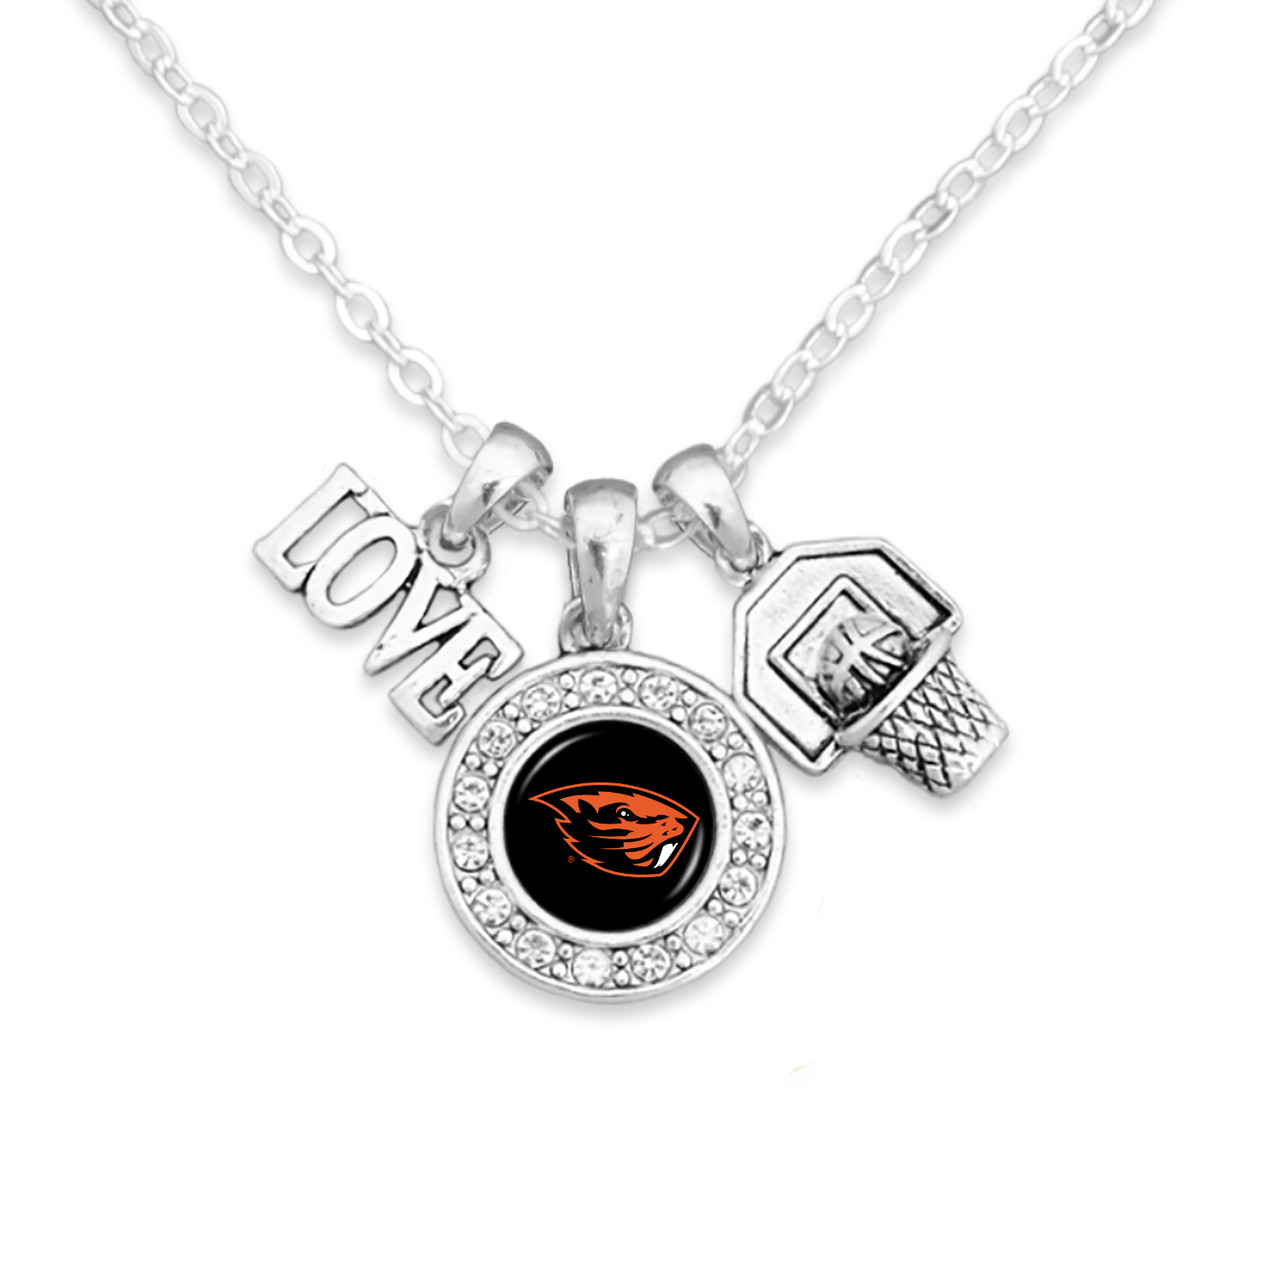 Oregon State Beavers Necklace- Basketball, Love and Logo